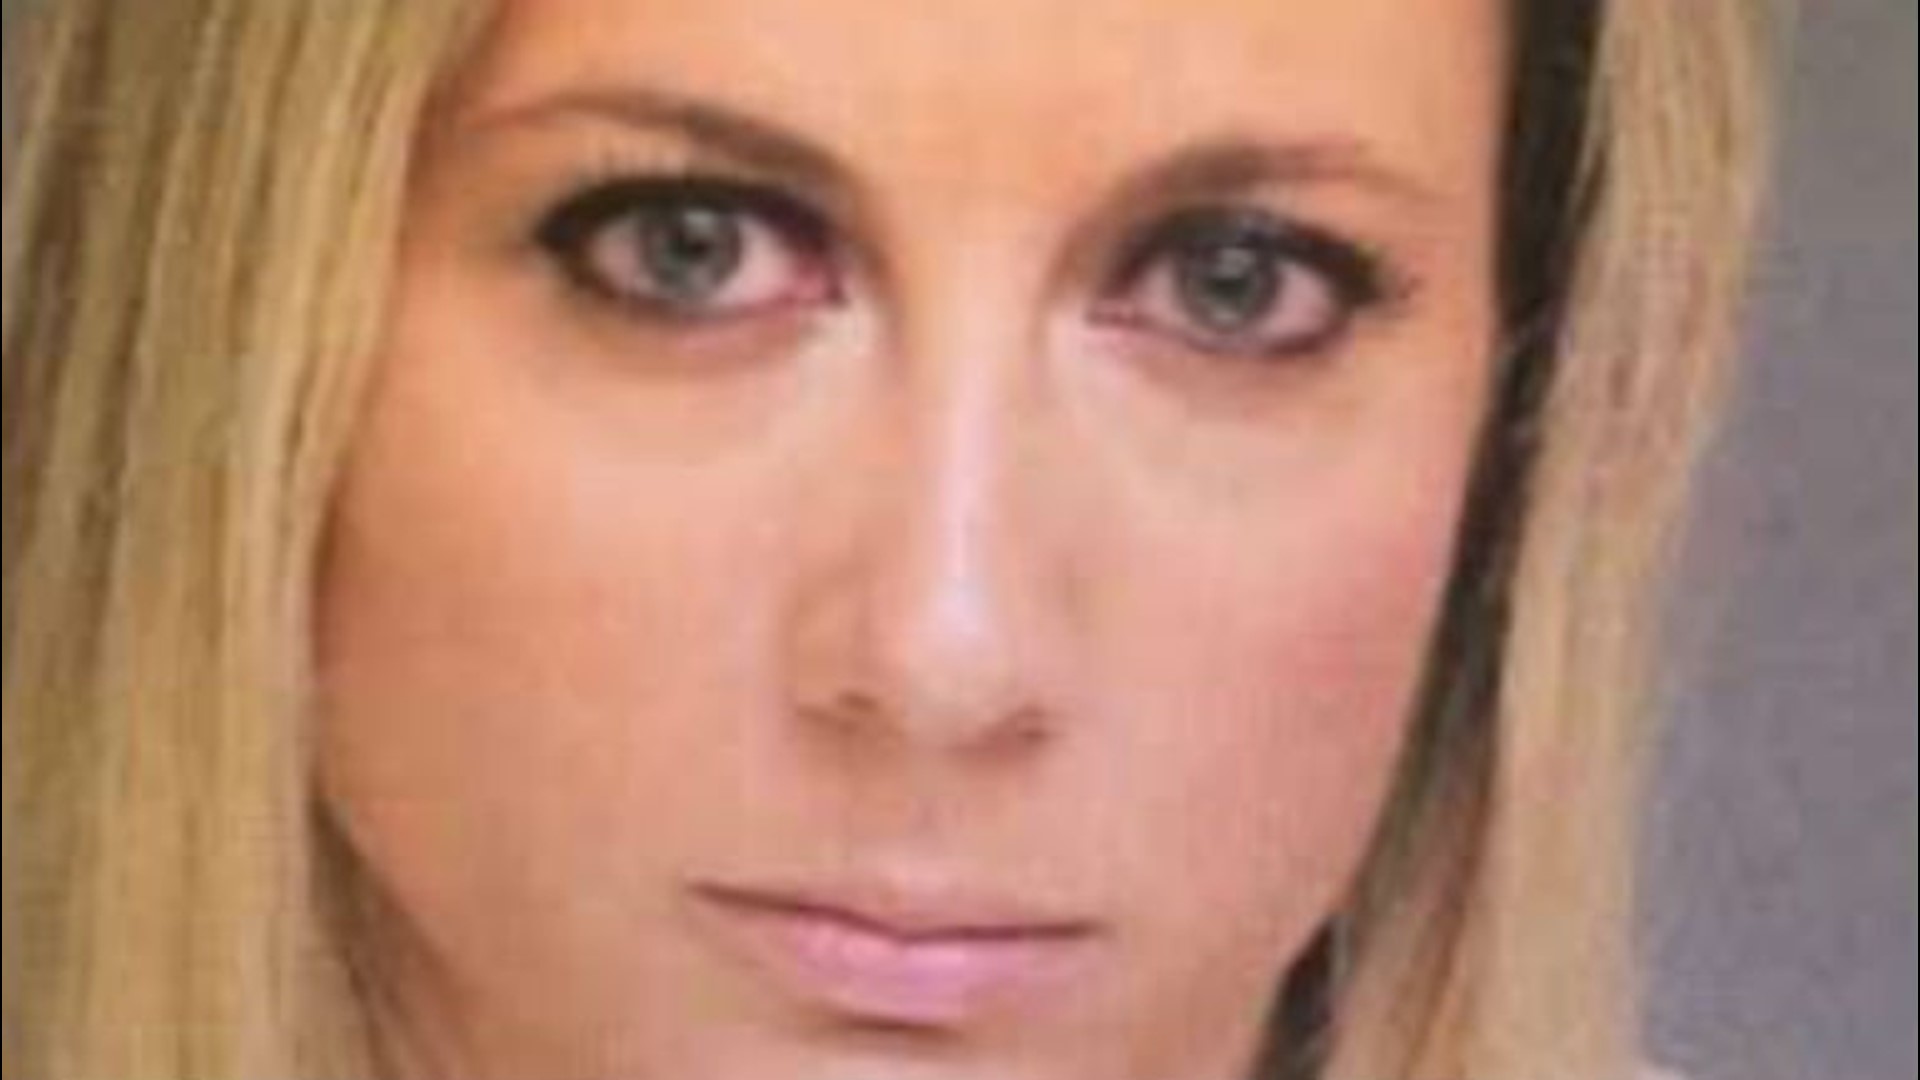 Teacher Accused Of Sex With Teen ‘youre Not Going To Be Happy With What You Find On My Phone